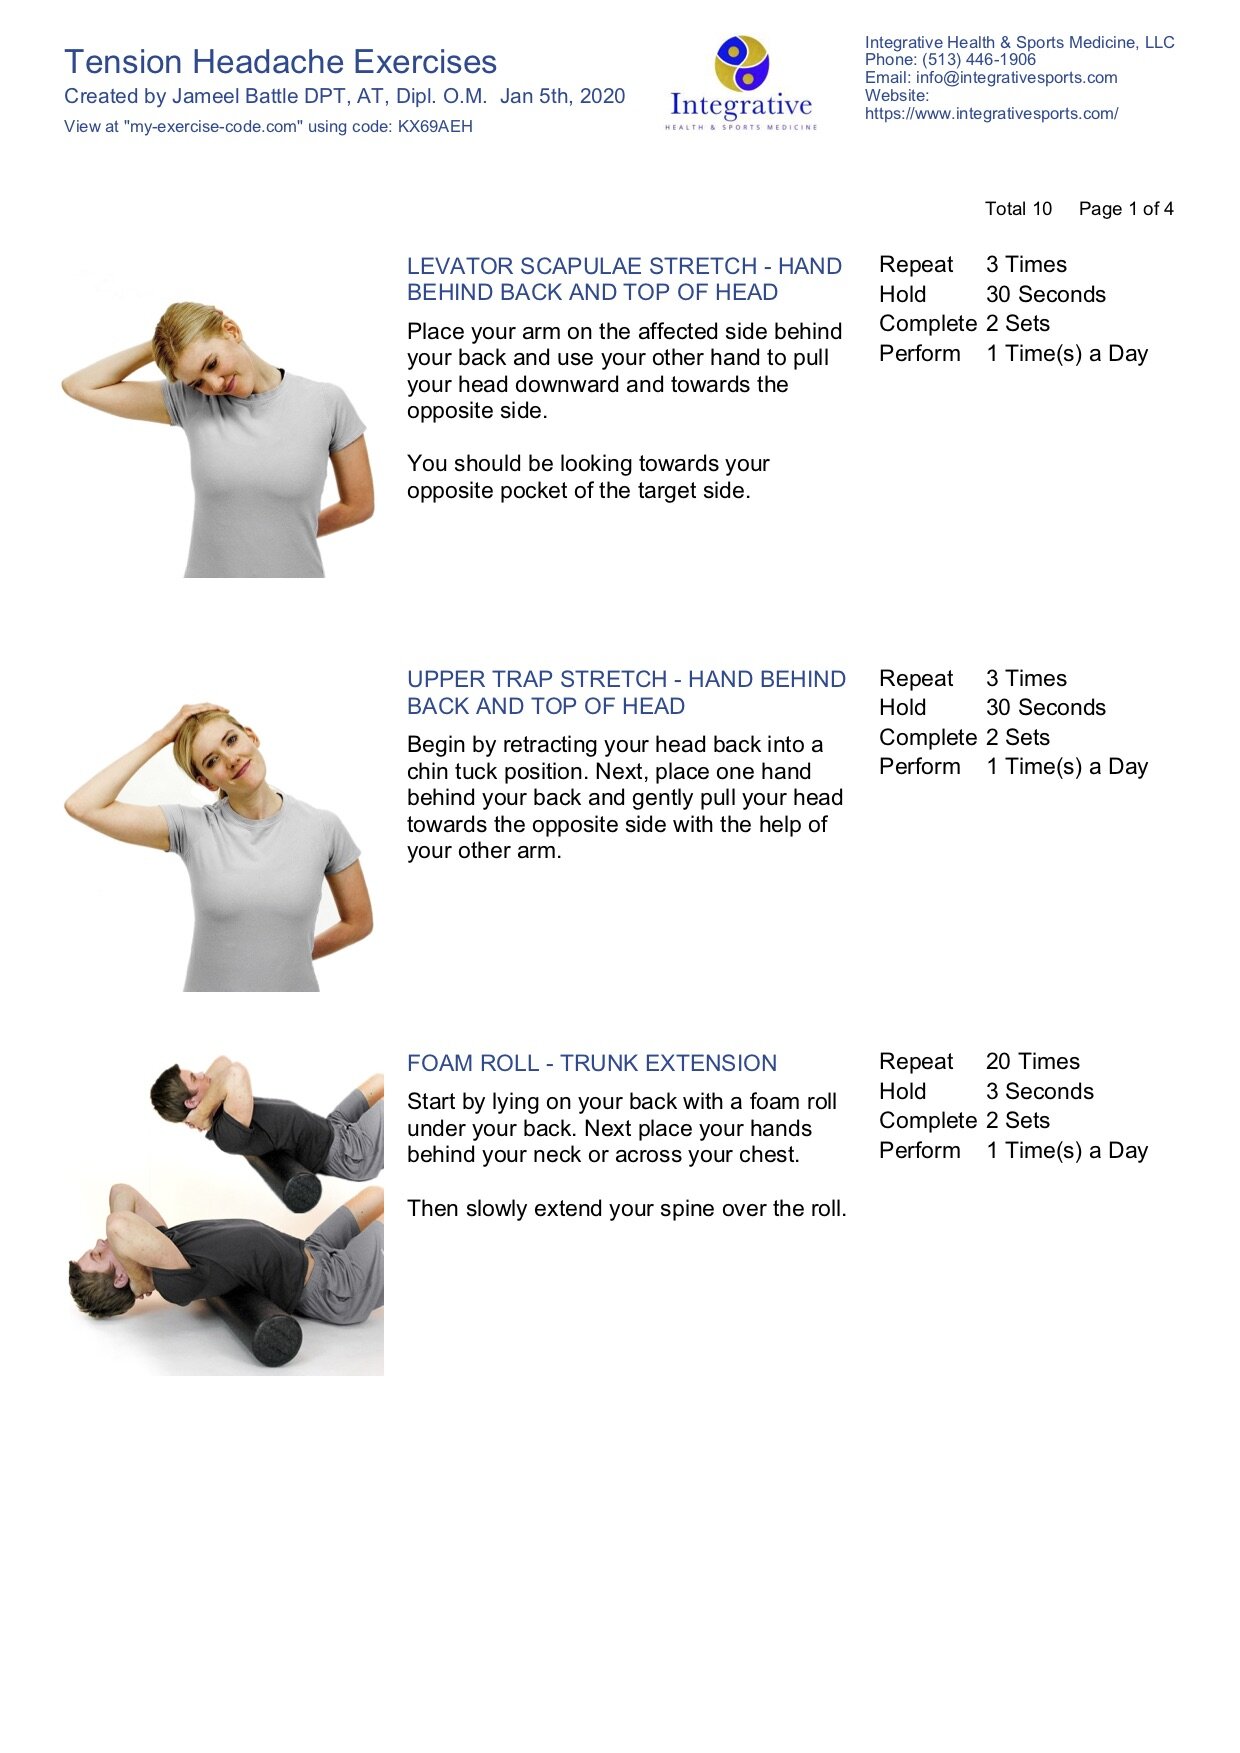 Neck muscles stretching exercise